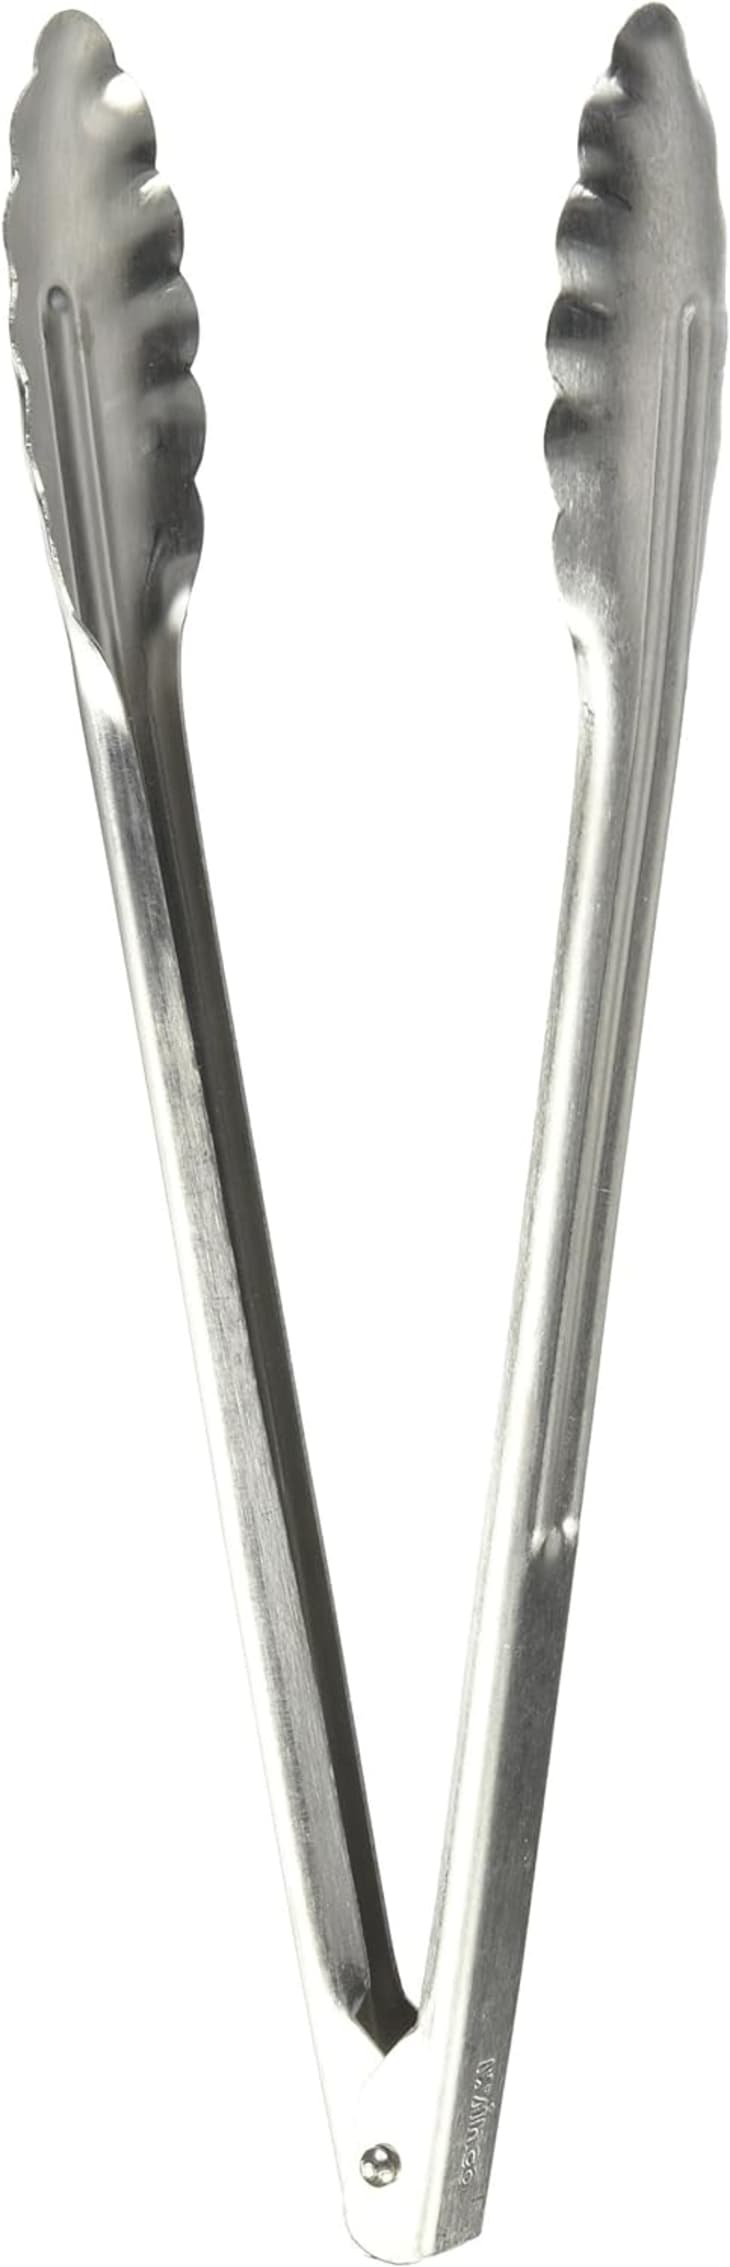 Winco Stainless Steel Utility Tongs at Amazon